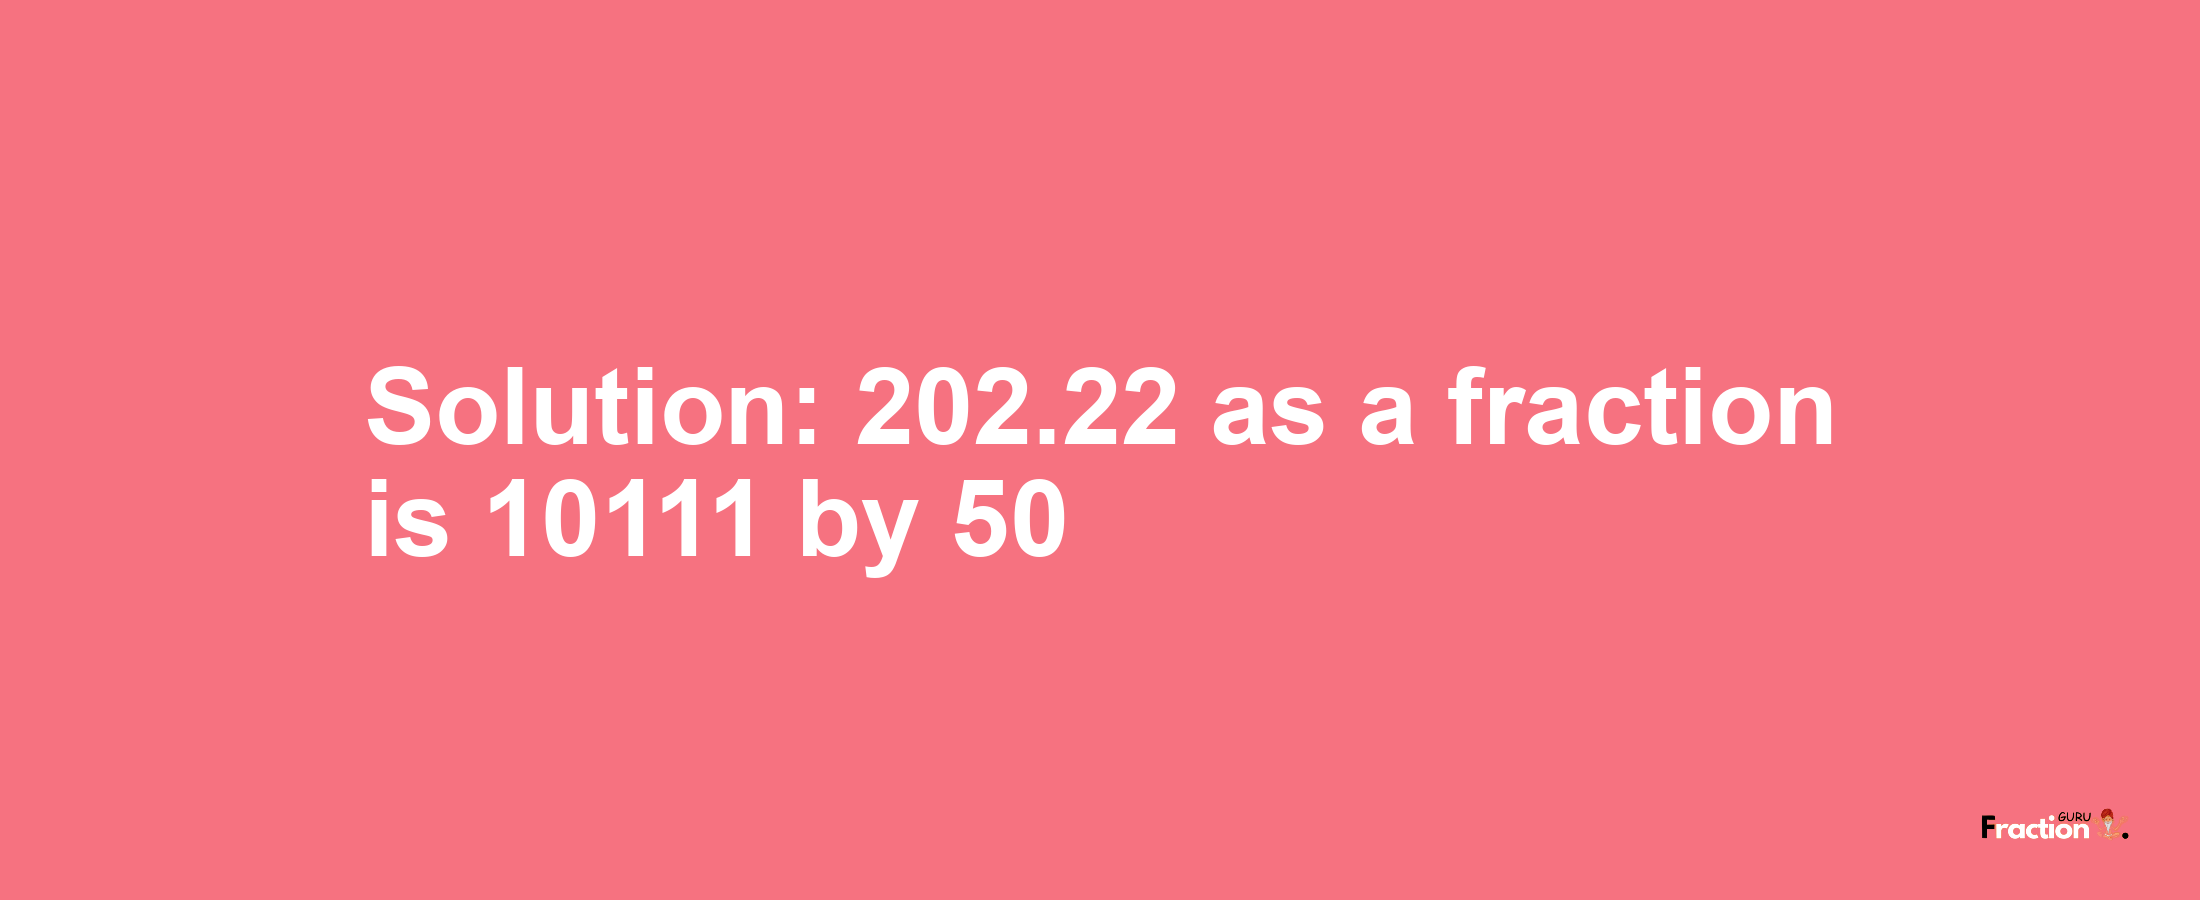 Solution:202.22 as a fraction is 10111/50